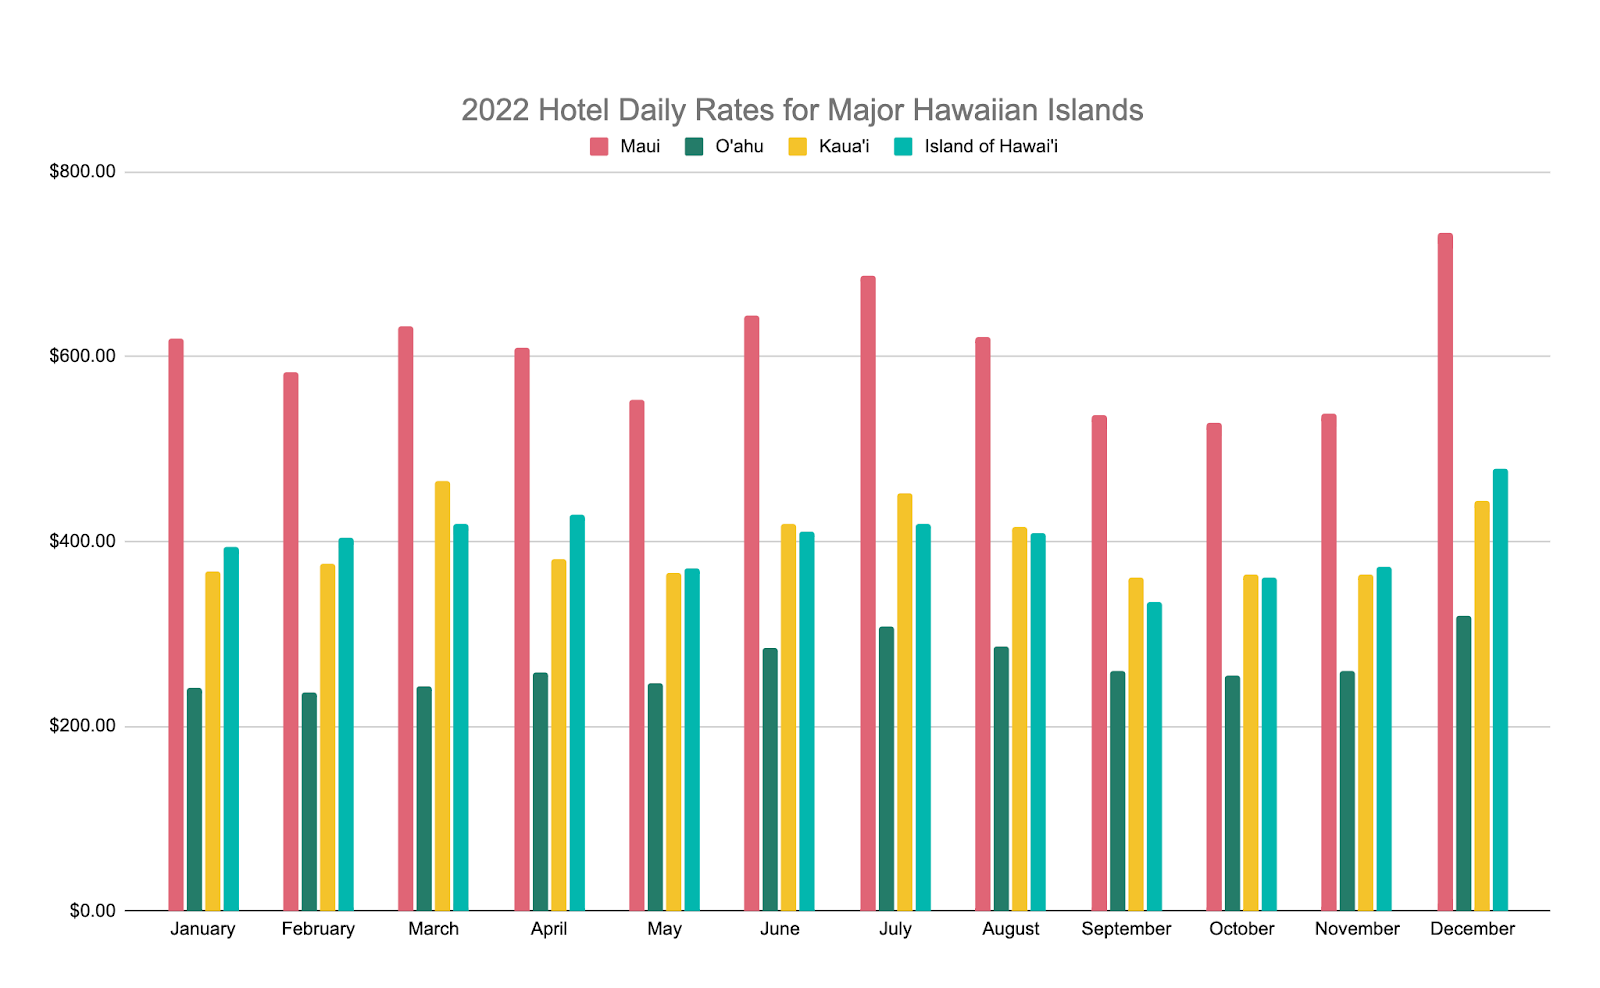 Chart showing 2022 daily hotel rates for the islands throughout the year. Maui is consistently the most expensive, while Oahu is consistently the most affordable.